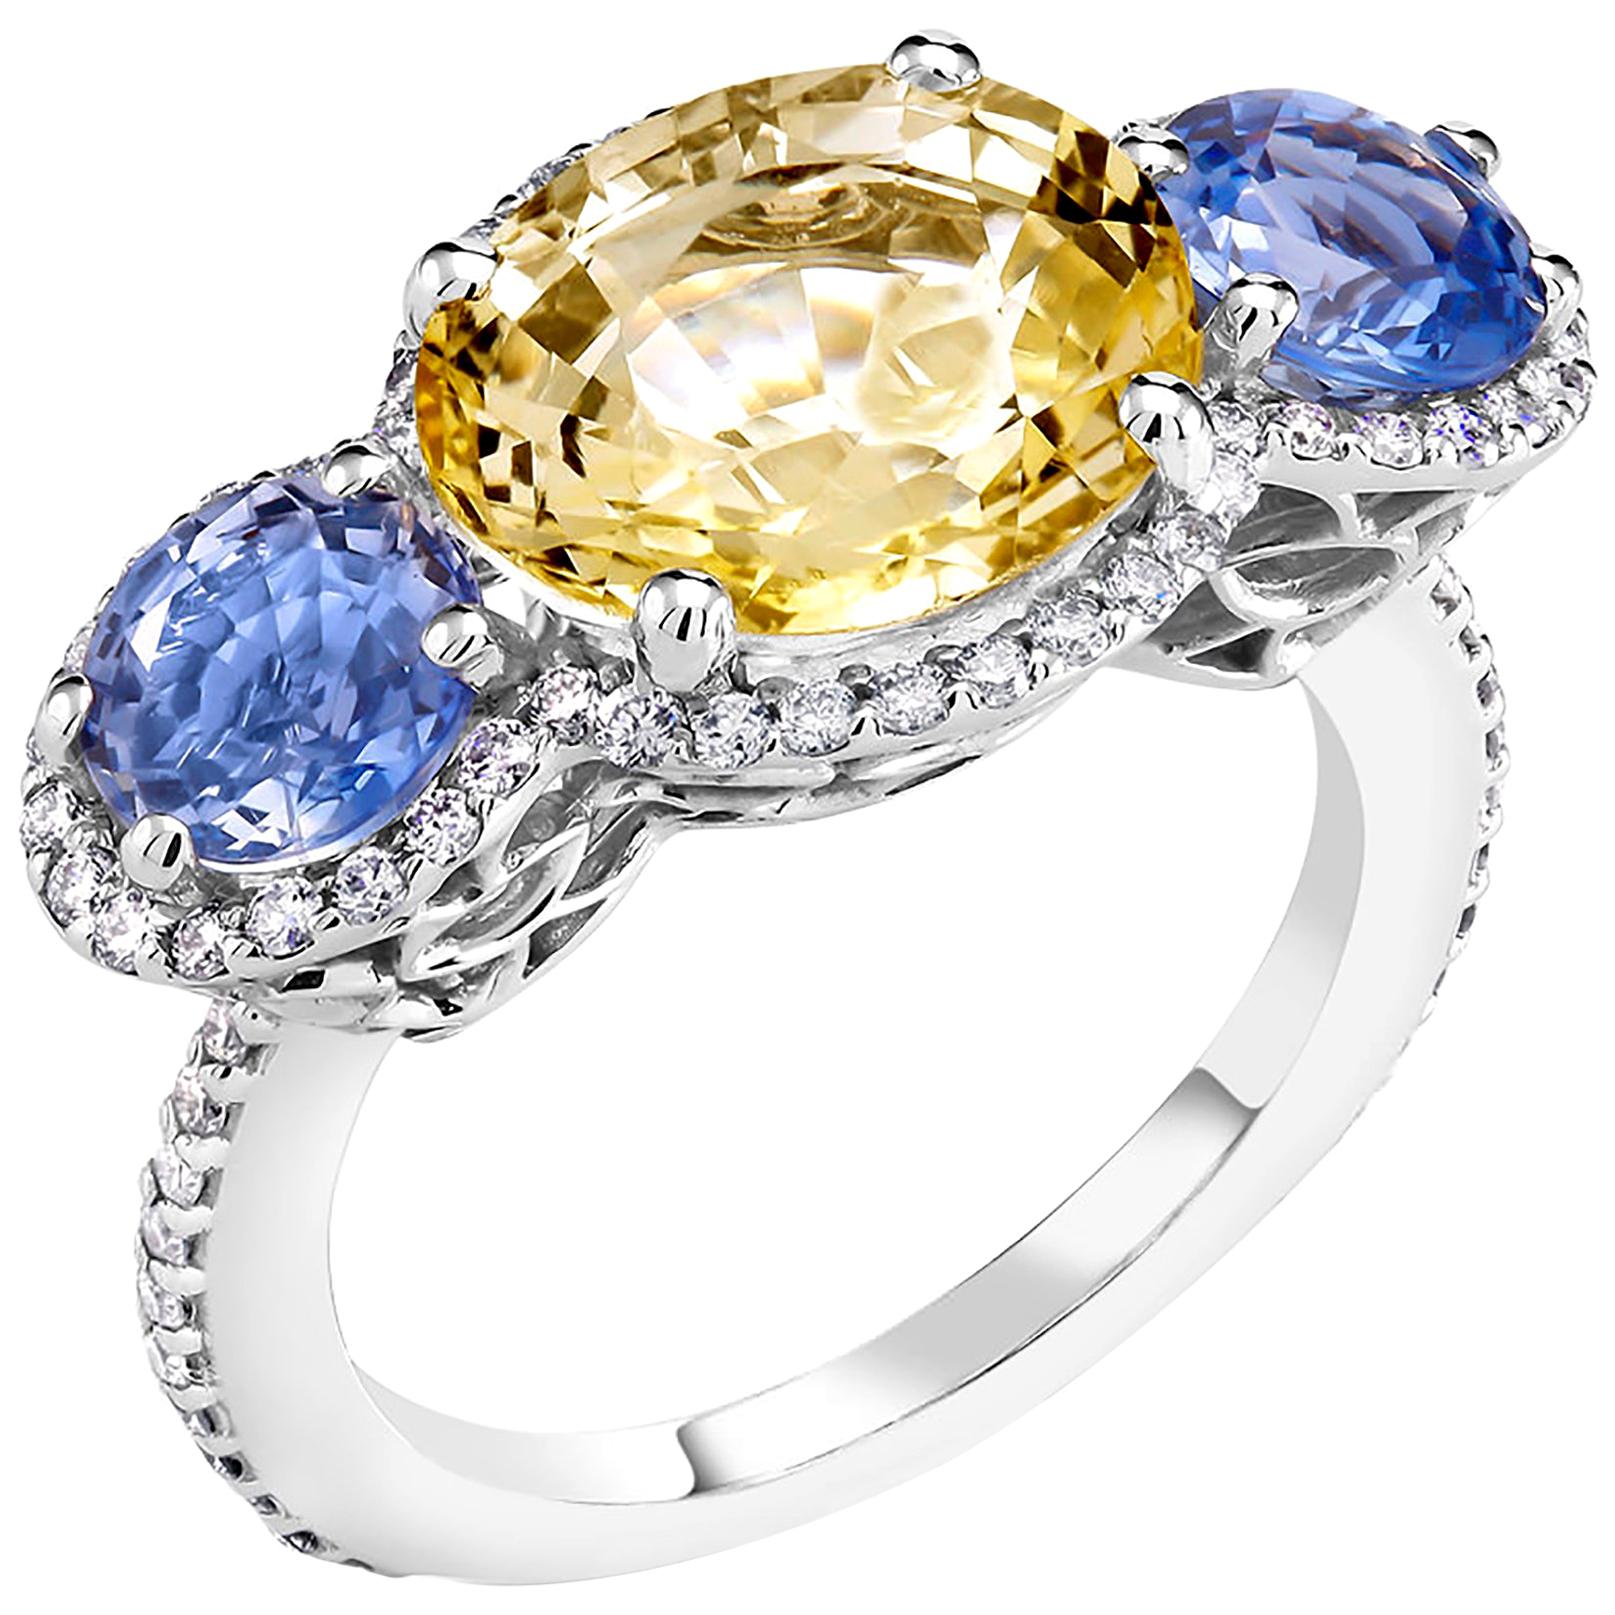 Diamond Blue and Yellow Sapphire Cocktail Ring Weighing 8.18 Carat